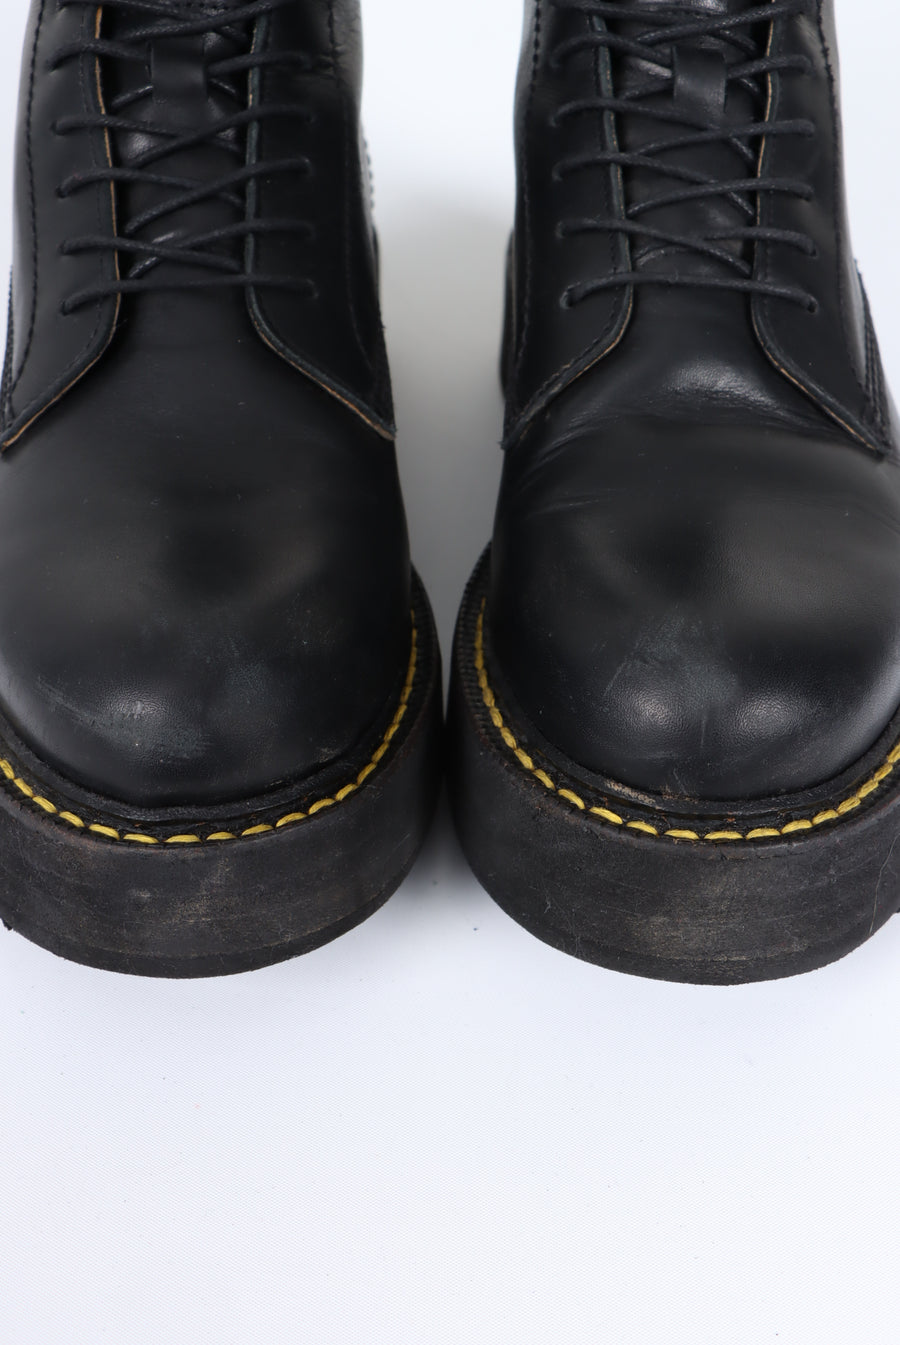 R13 'Single Stack' Black Leather Platform Boots Italy Made (39)